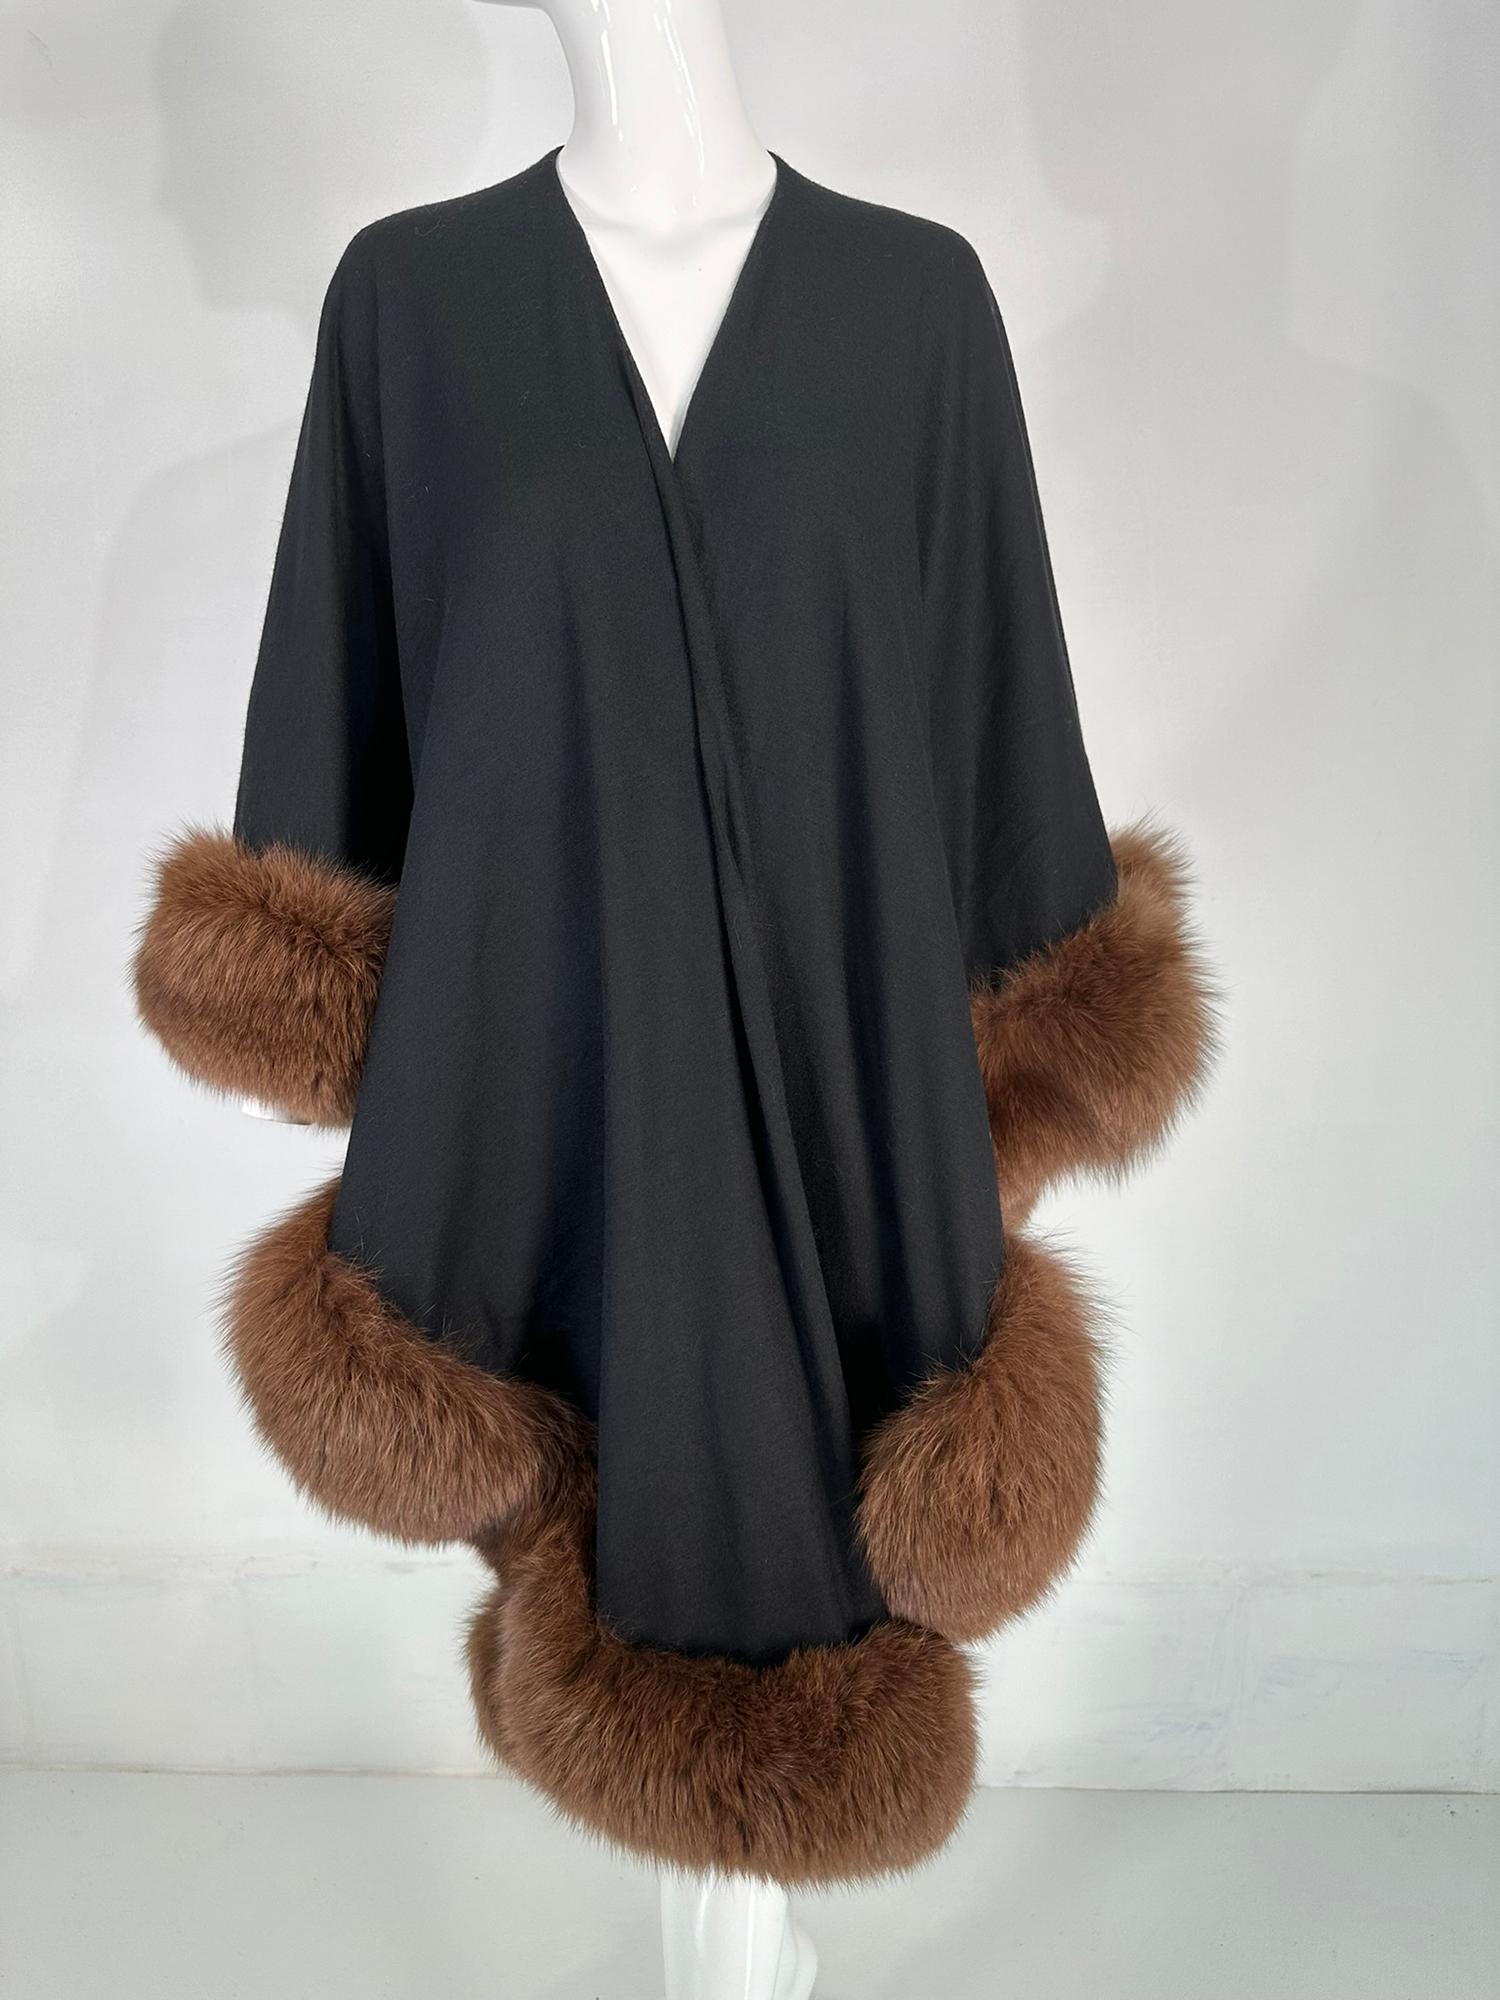 Adrienne Landau Sable Trimmed Black Wool knit Cape/Wrap From the 1990s For Sale 9